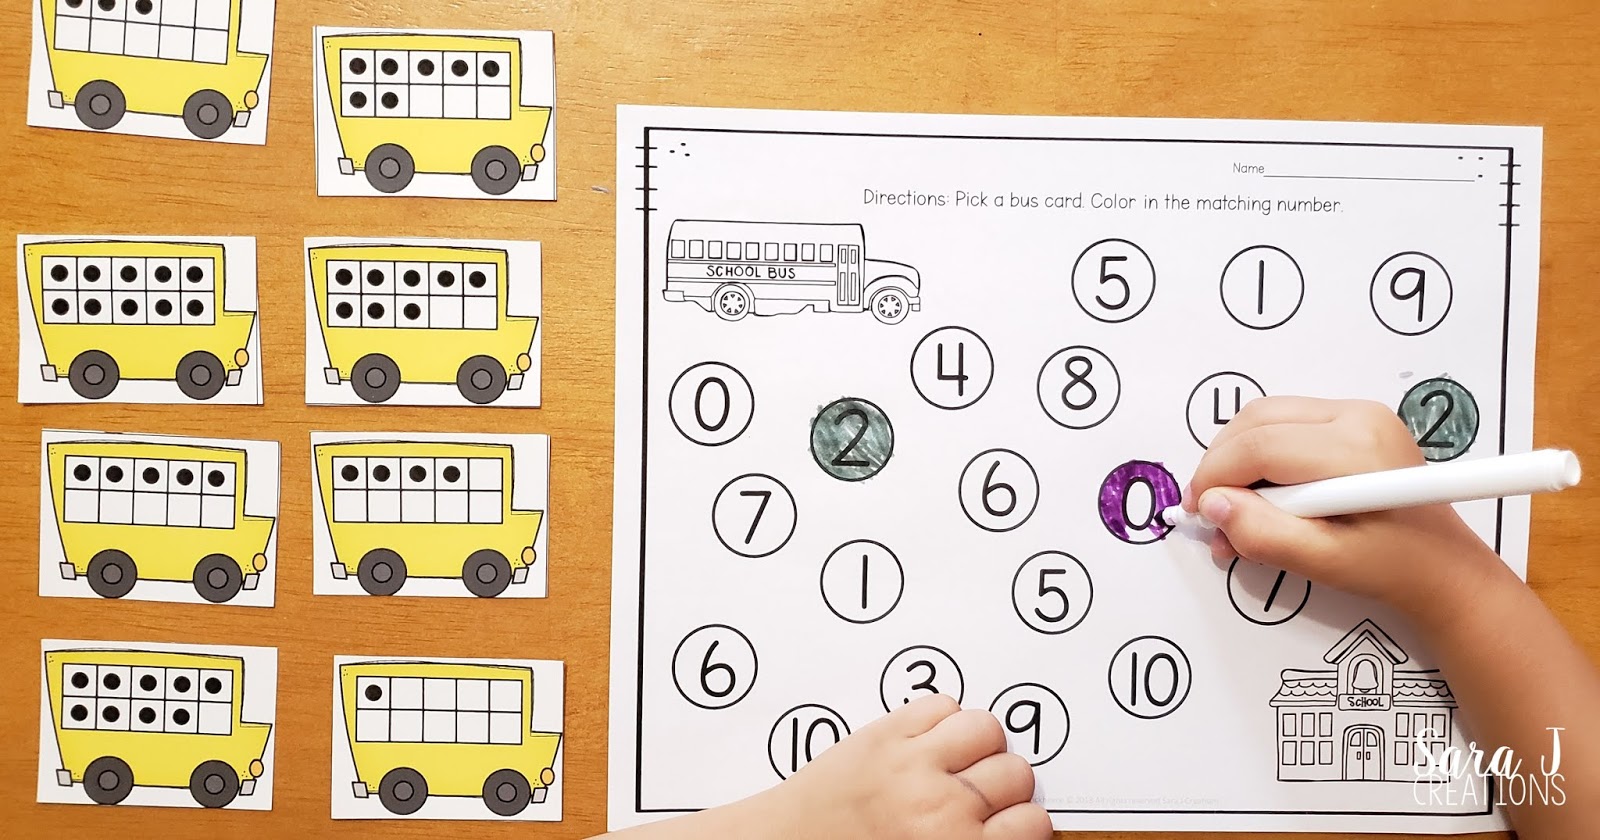 Practice counting and subitizing with these adorable school bus ten frames matching activities. These cards and recording sheets can be used in a variety of ways to differentiate math in your classroom. Ideal for math workshop, math centers, intervention groups, small group and independent practice. Click here to download your free cards and get your back to school season off to a fun start!